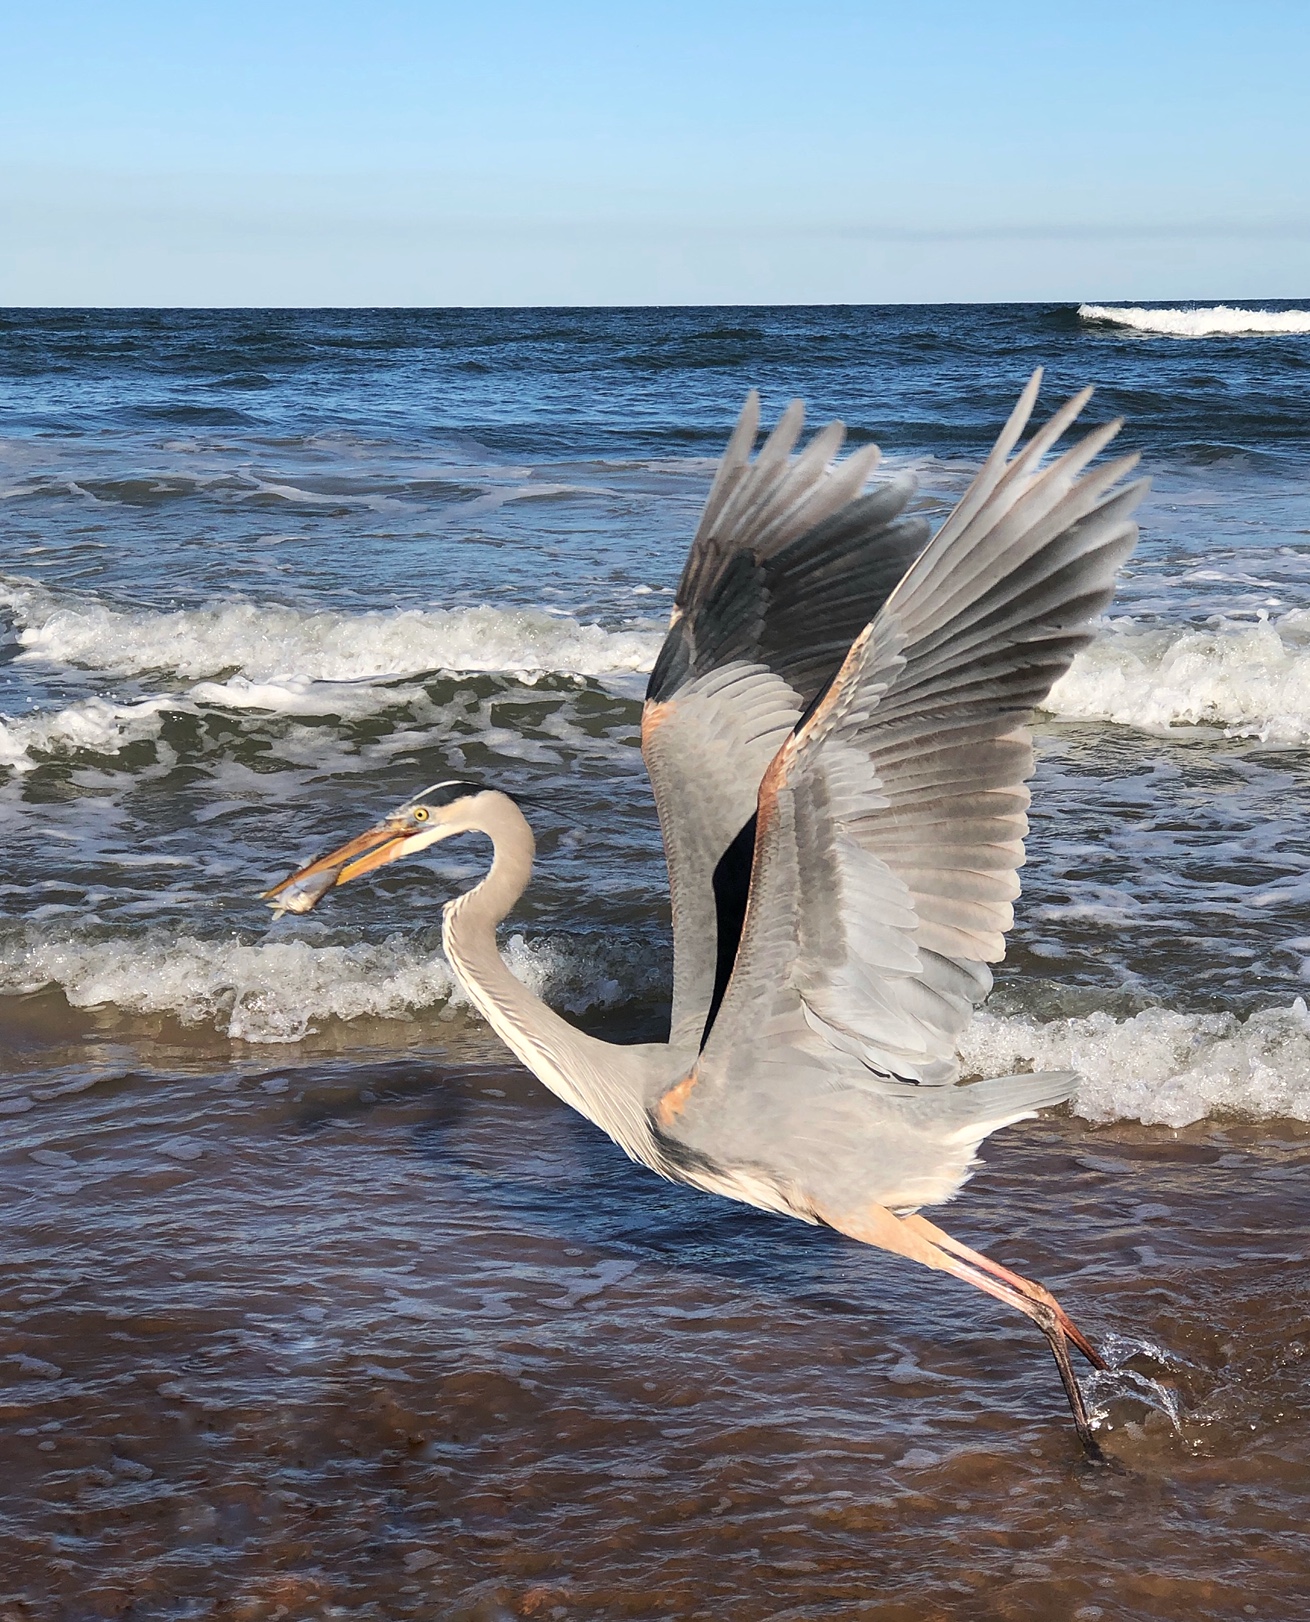 Great Blue Heron catching dinner